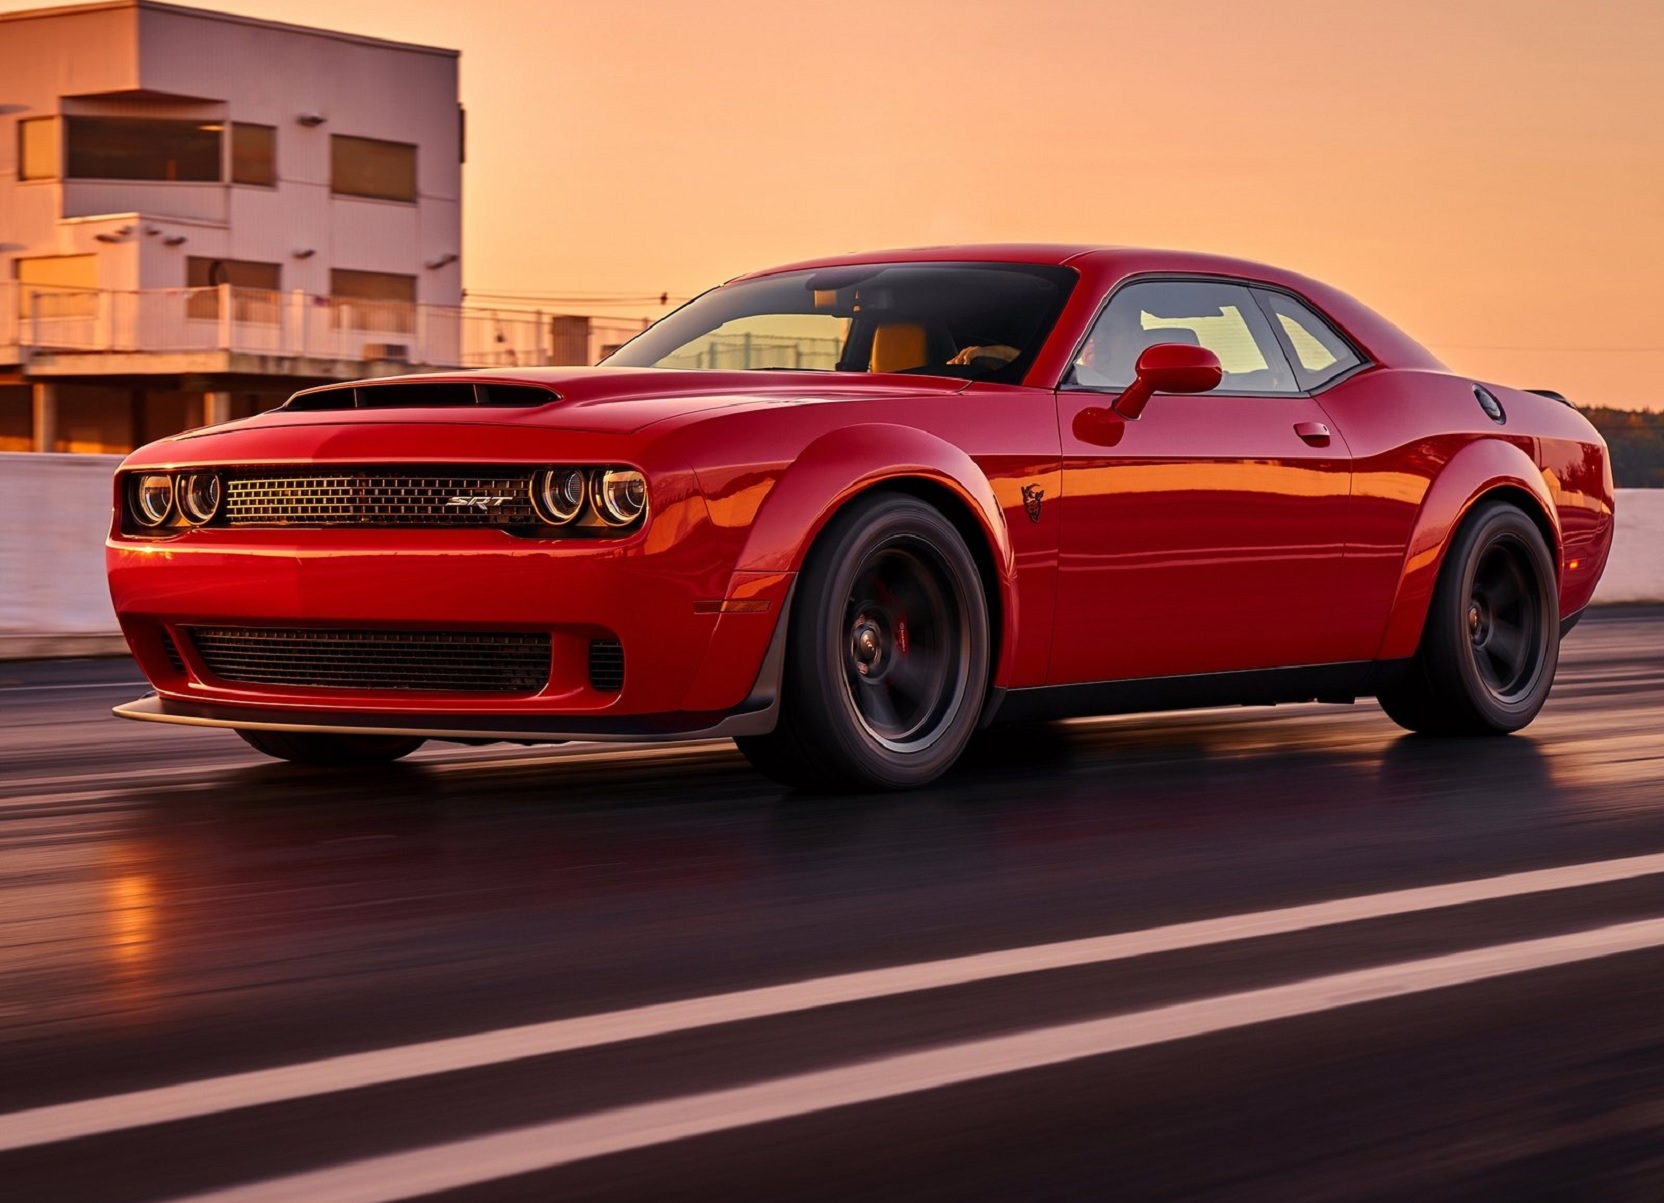 This Secret New Dodge Electric Muscle Car Set to be the World's Fastest